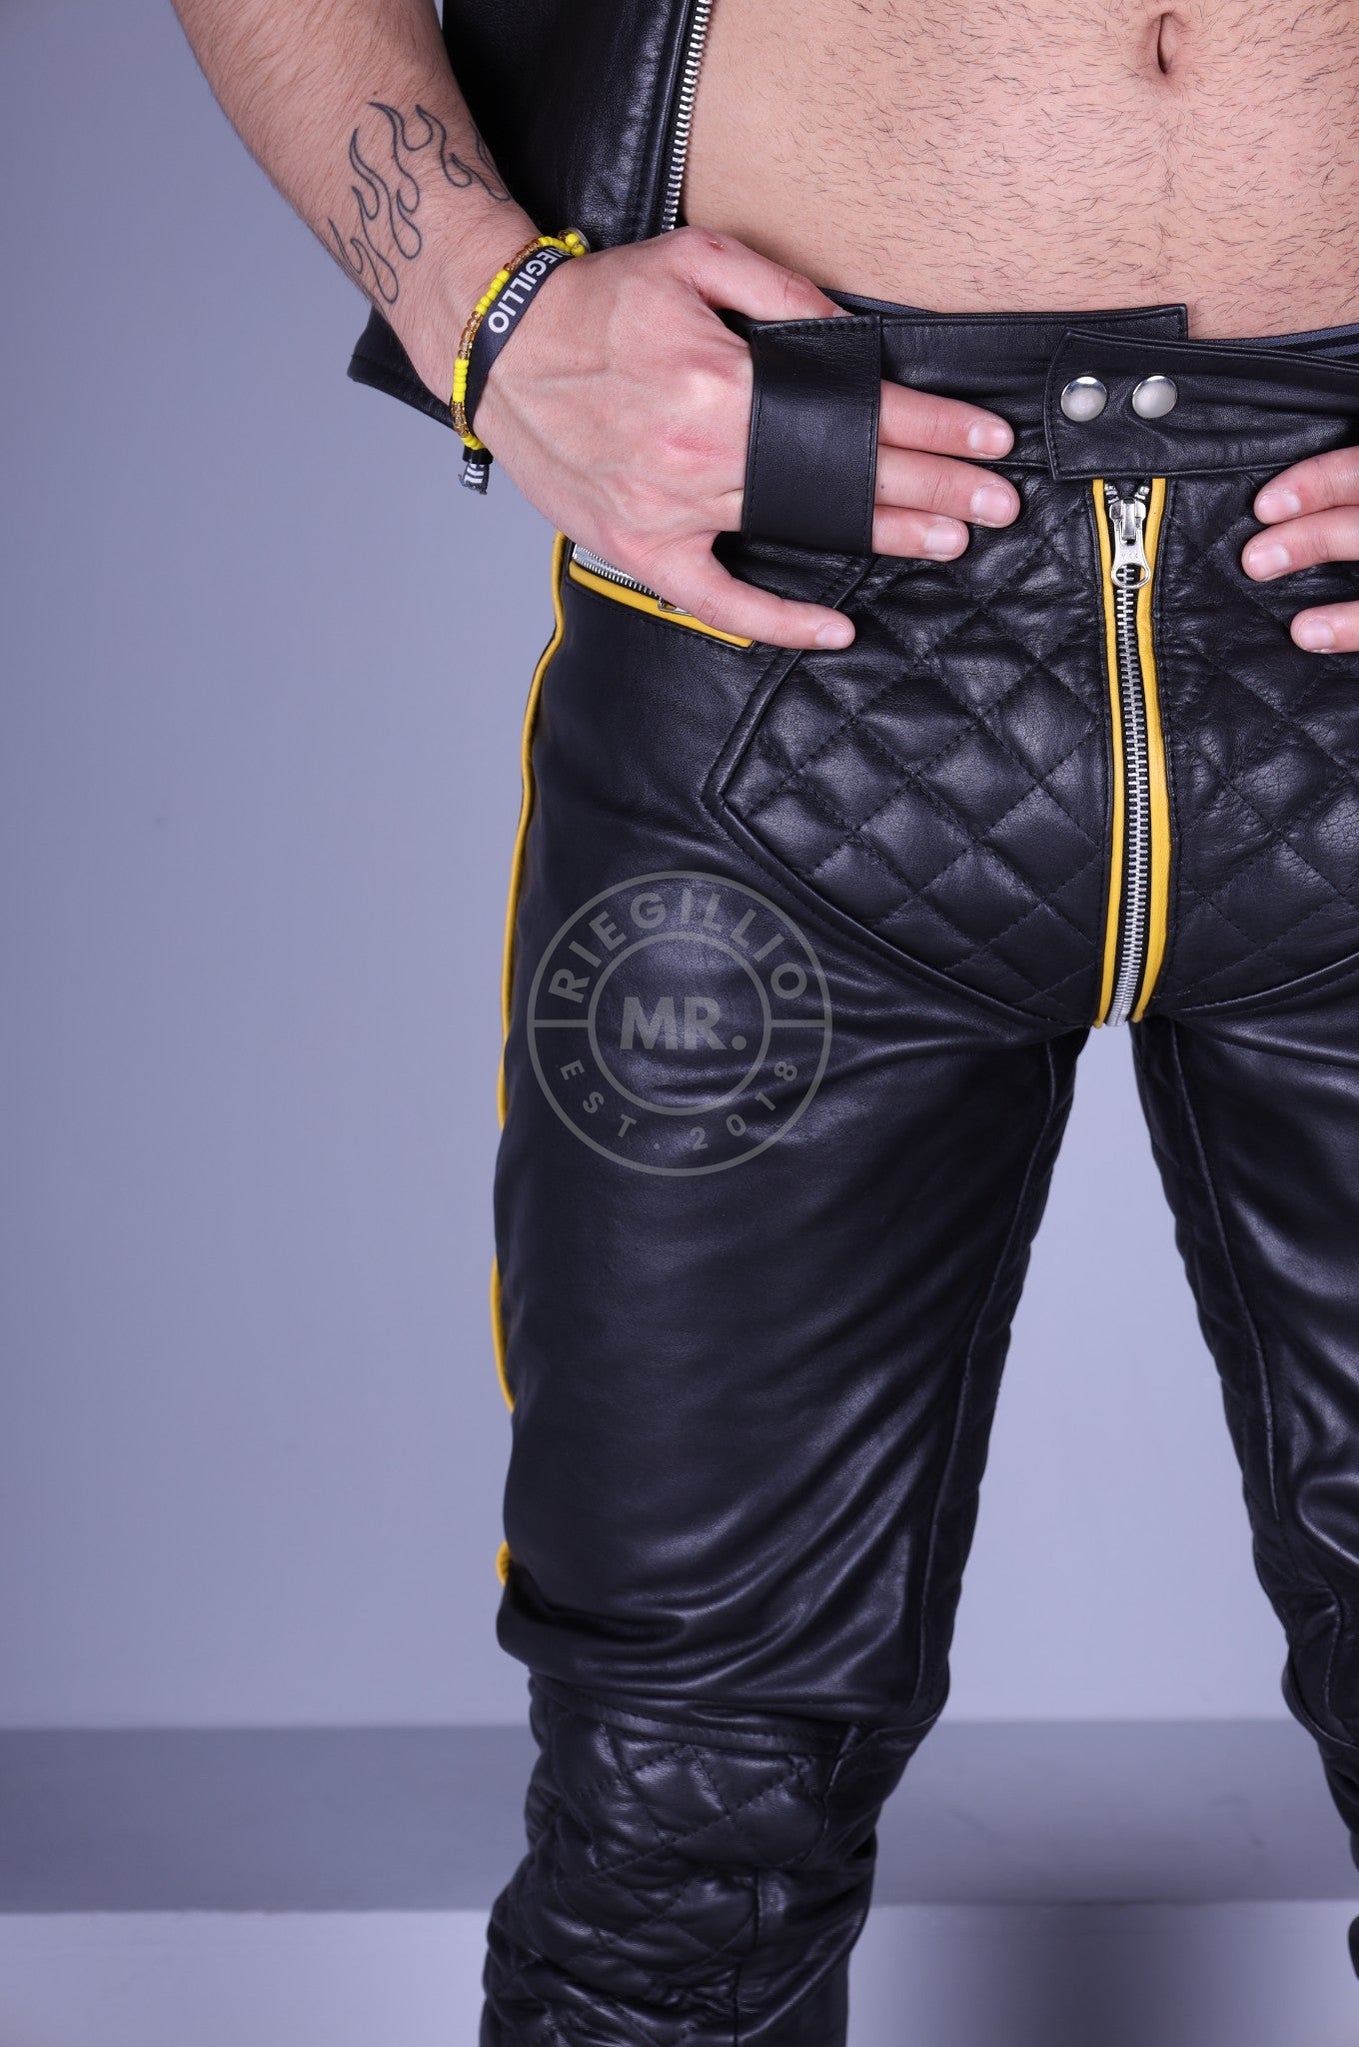 Padded Leather Pants - Yellow Piping at MR. Riegillio